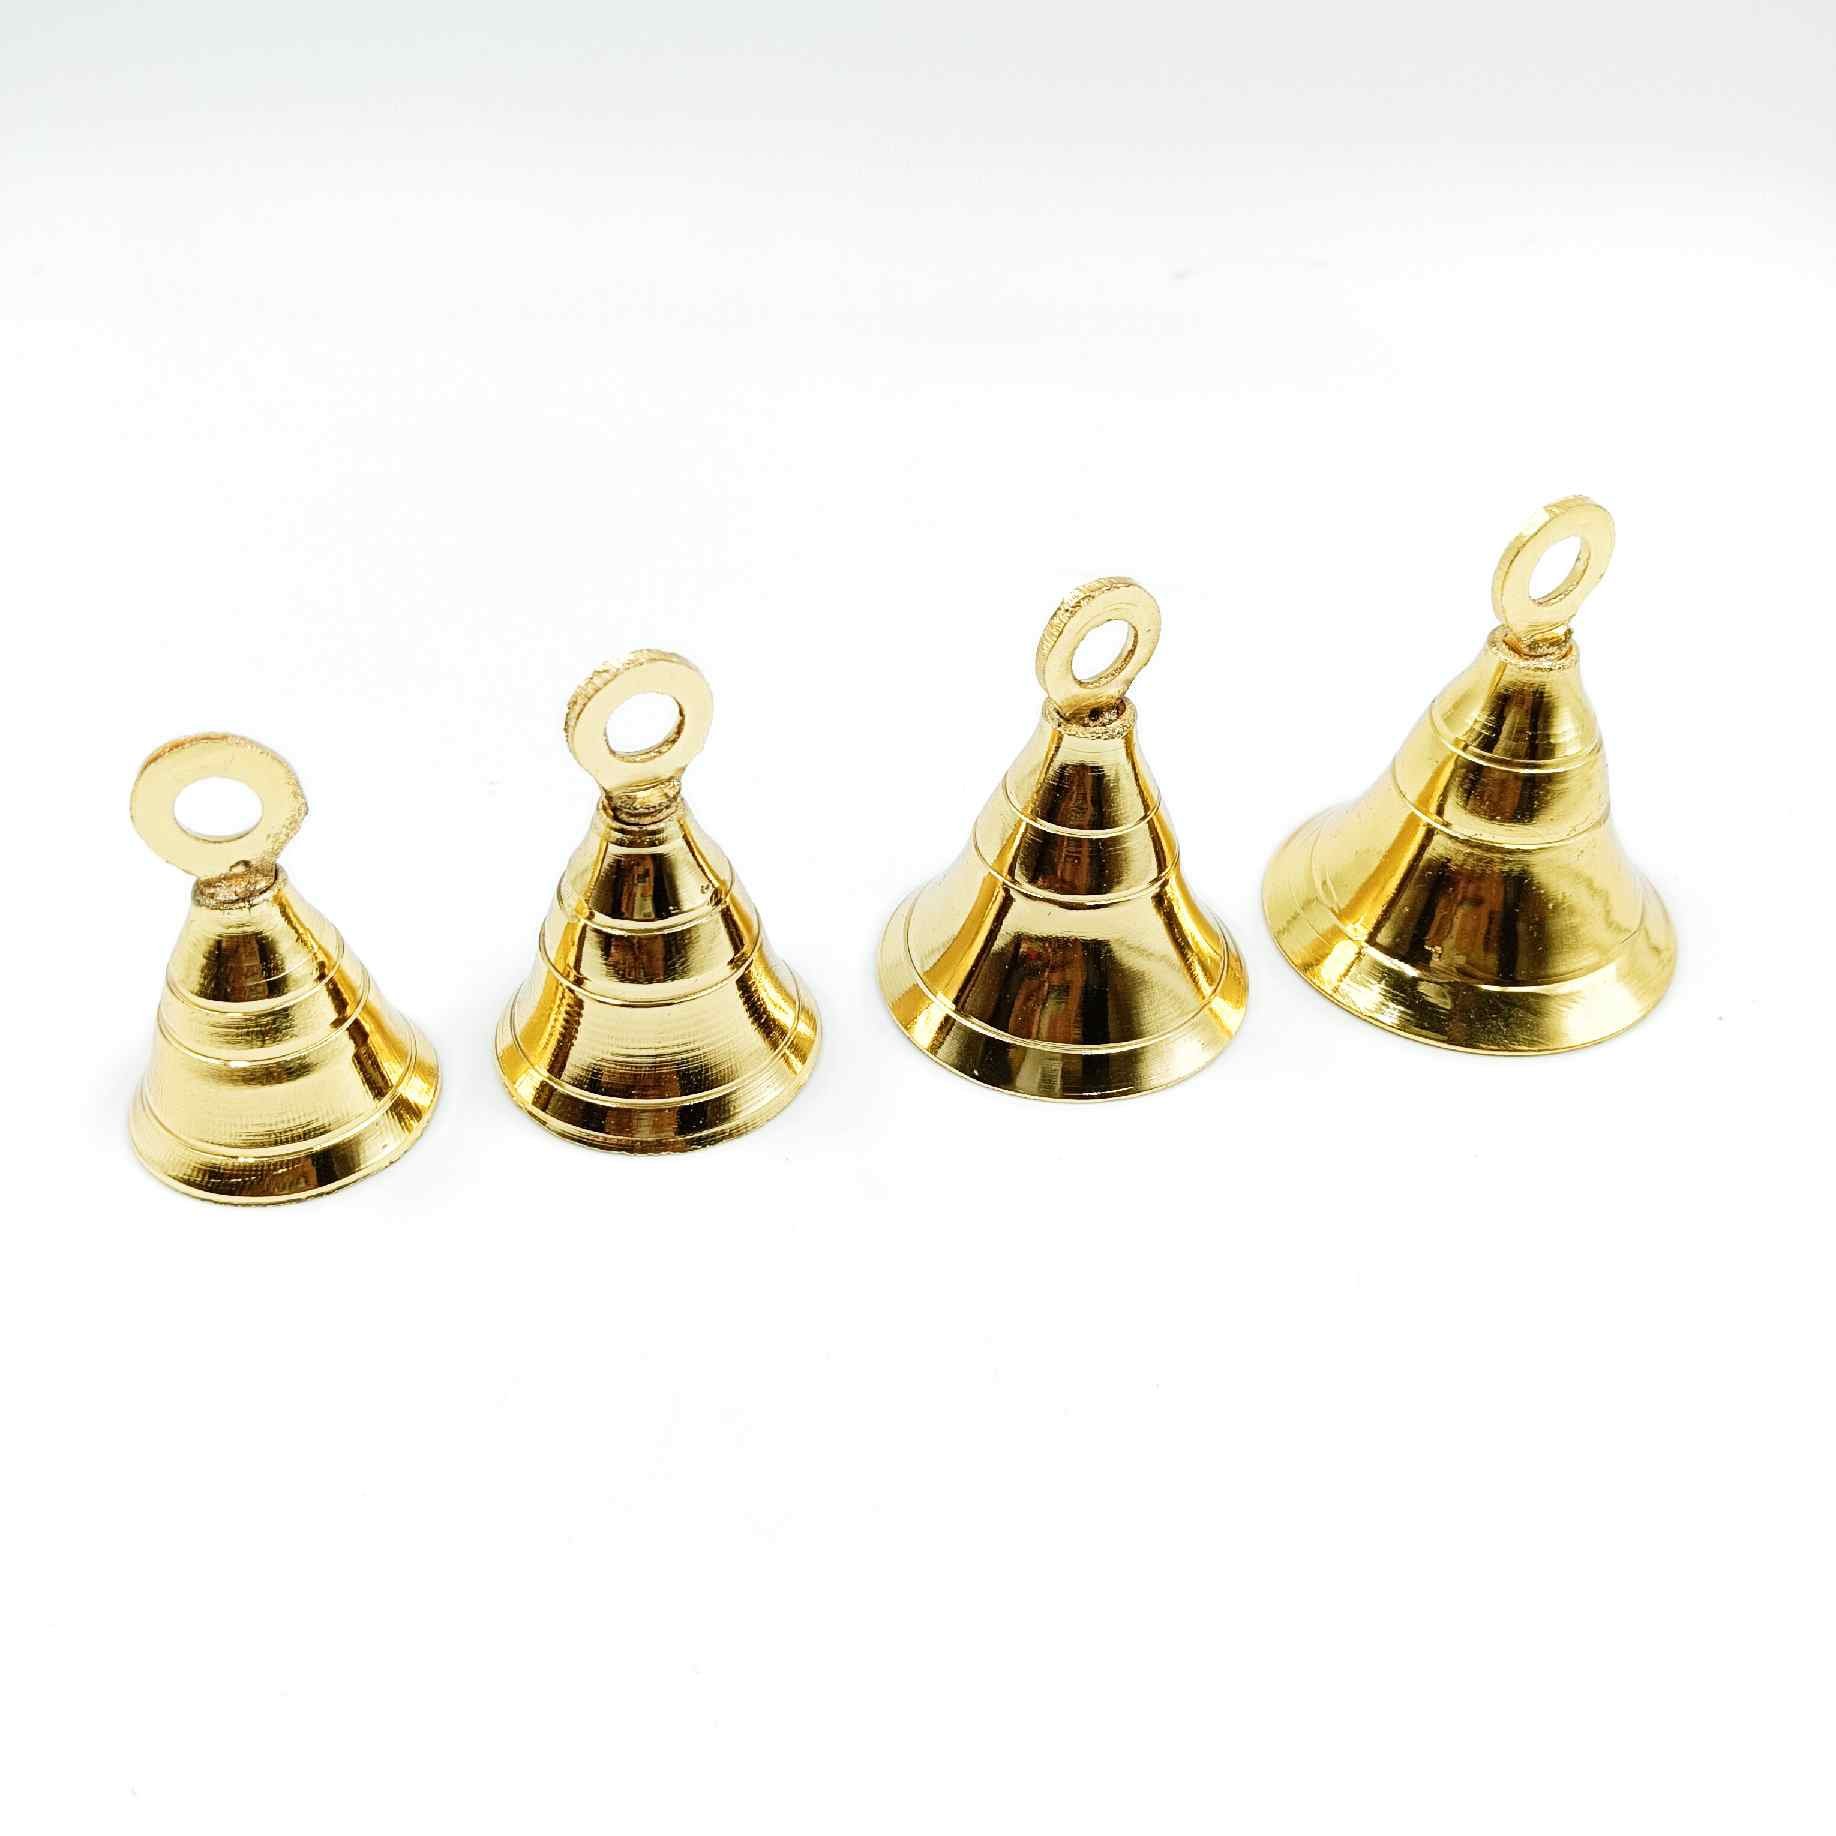 6 Assorted Mini Brass Bells with Loops for Hanging, Functional Decoration  for Crafting, Door Chime, Wedding Chimes, Gold Color by SciencePurchase :  : Home